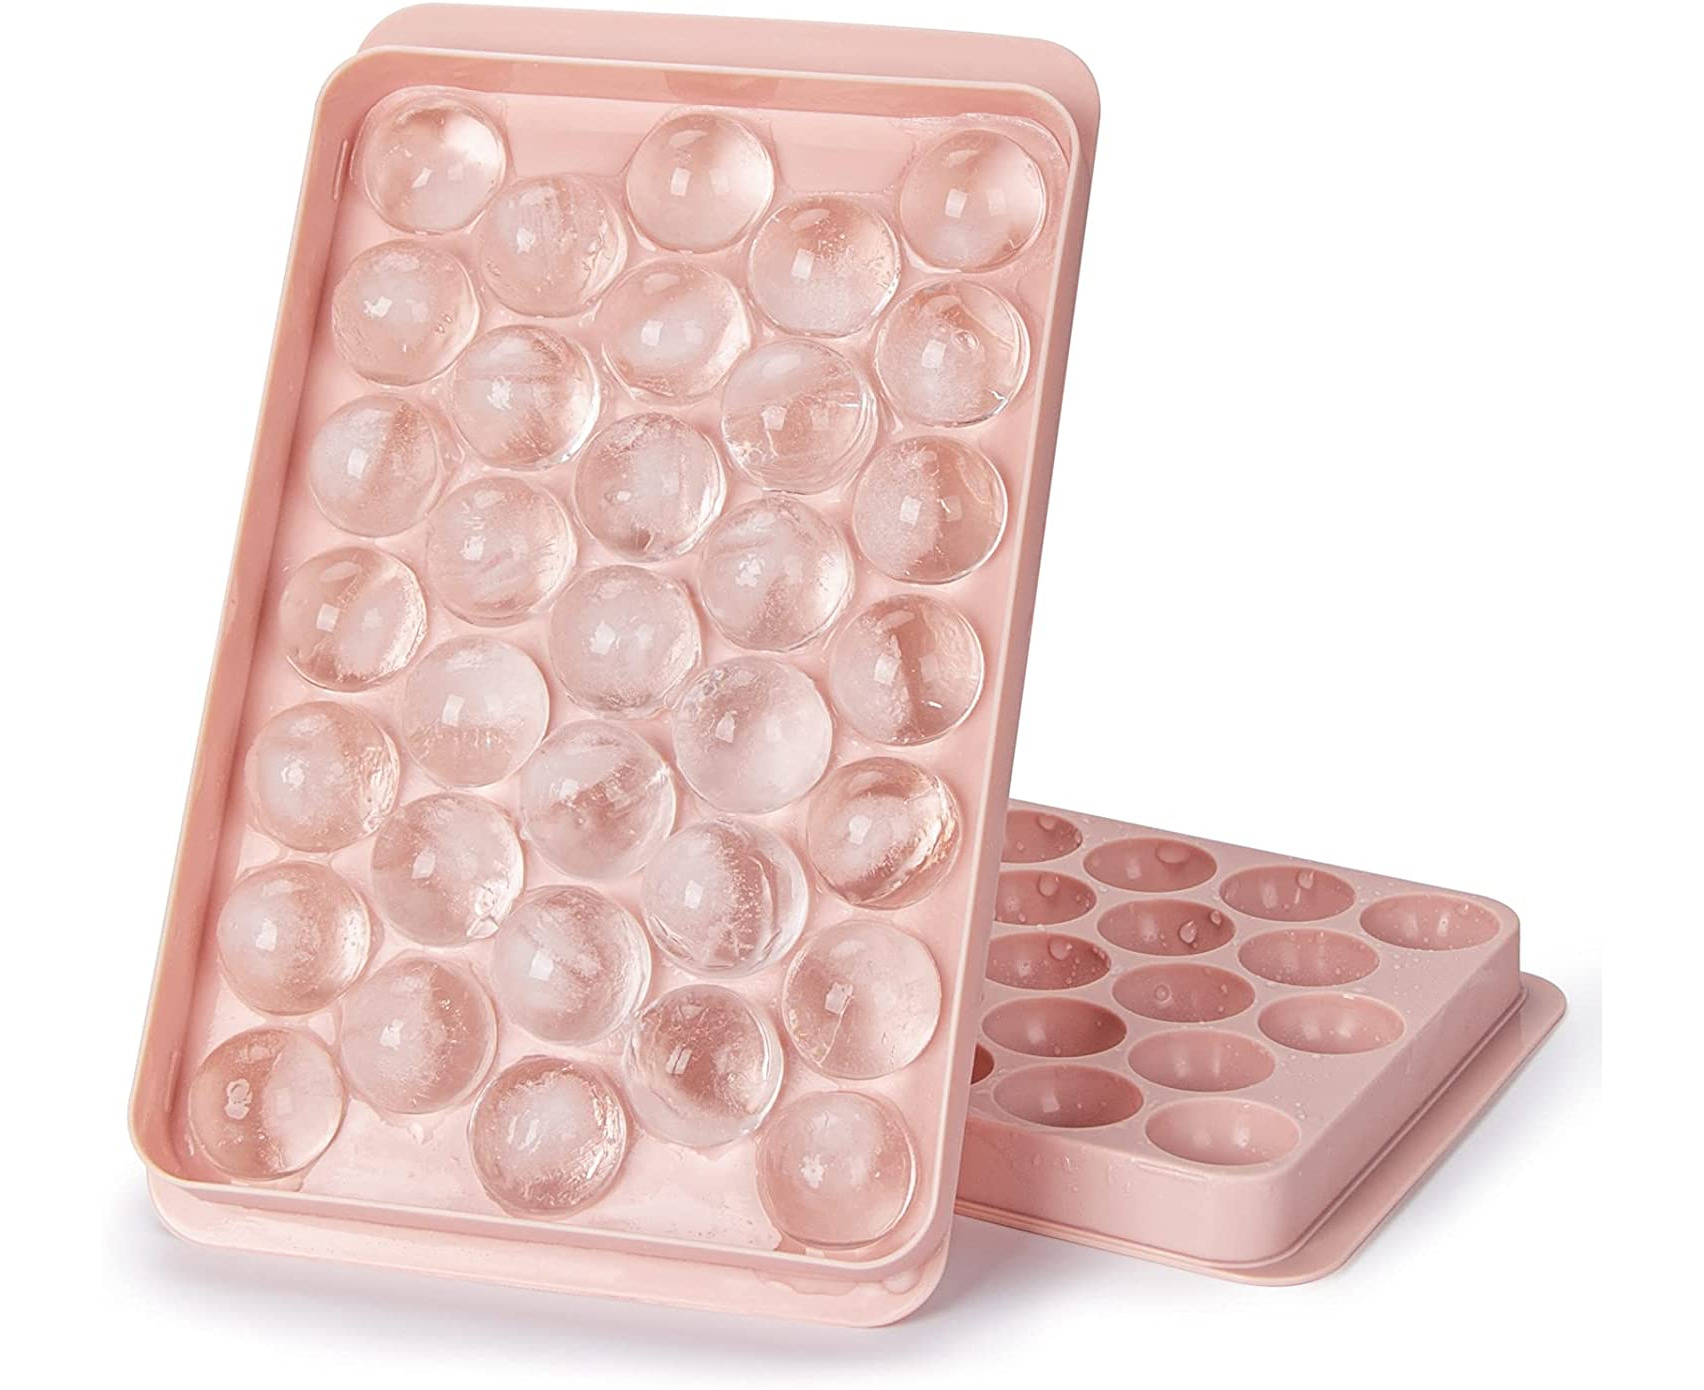 4 Pack Mini Round Ice Cube Tray, Ice Ball Maker Mold for Freezer with  Container, Sphere Ice Cube Tray Making 99pcs Circle Ice Chilling Cocktail